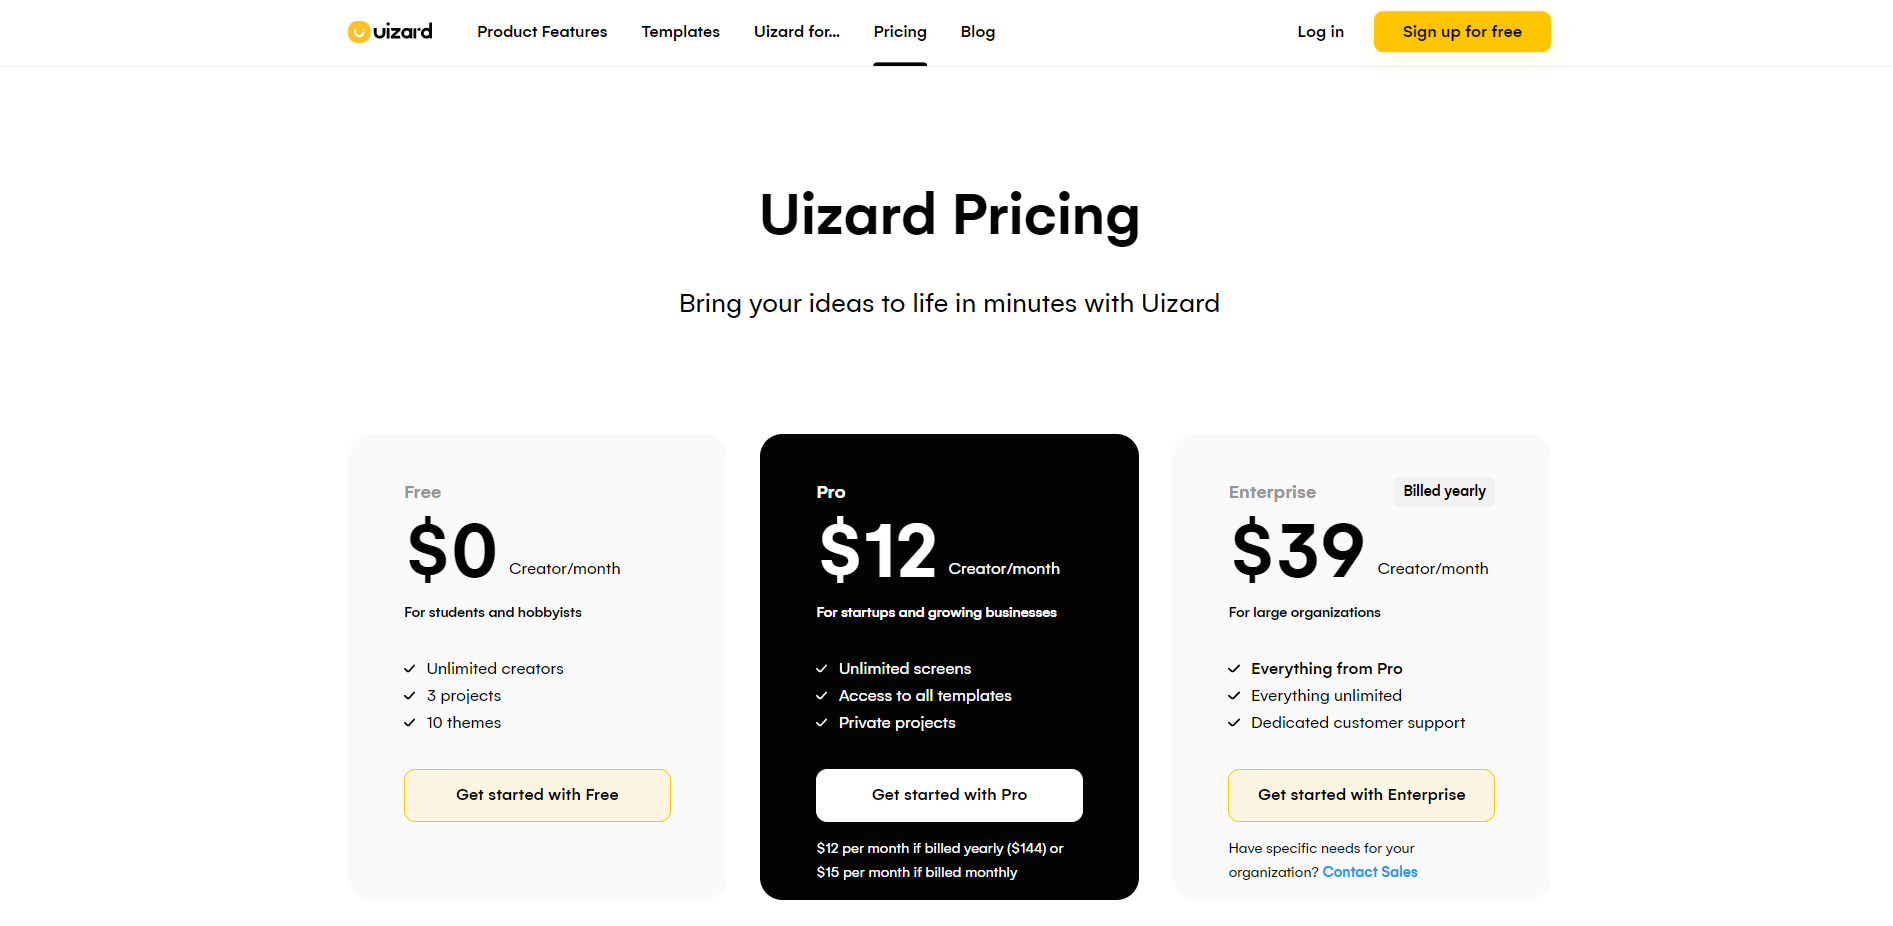 Uizard Pricing